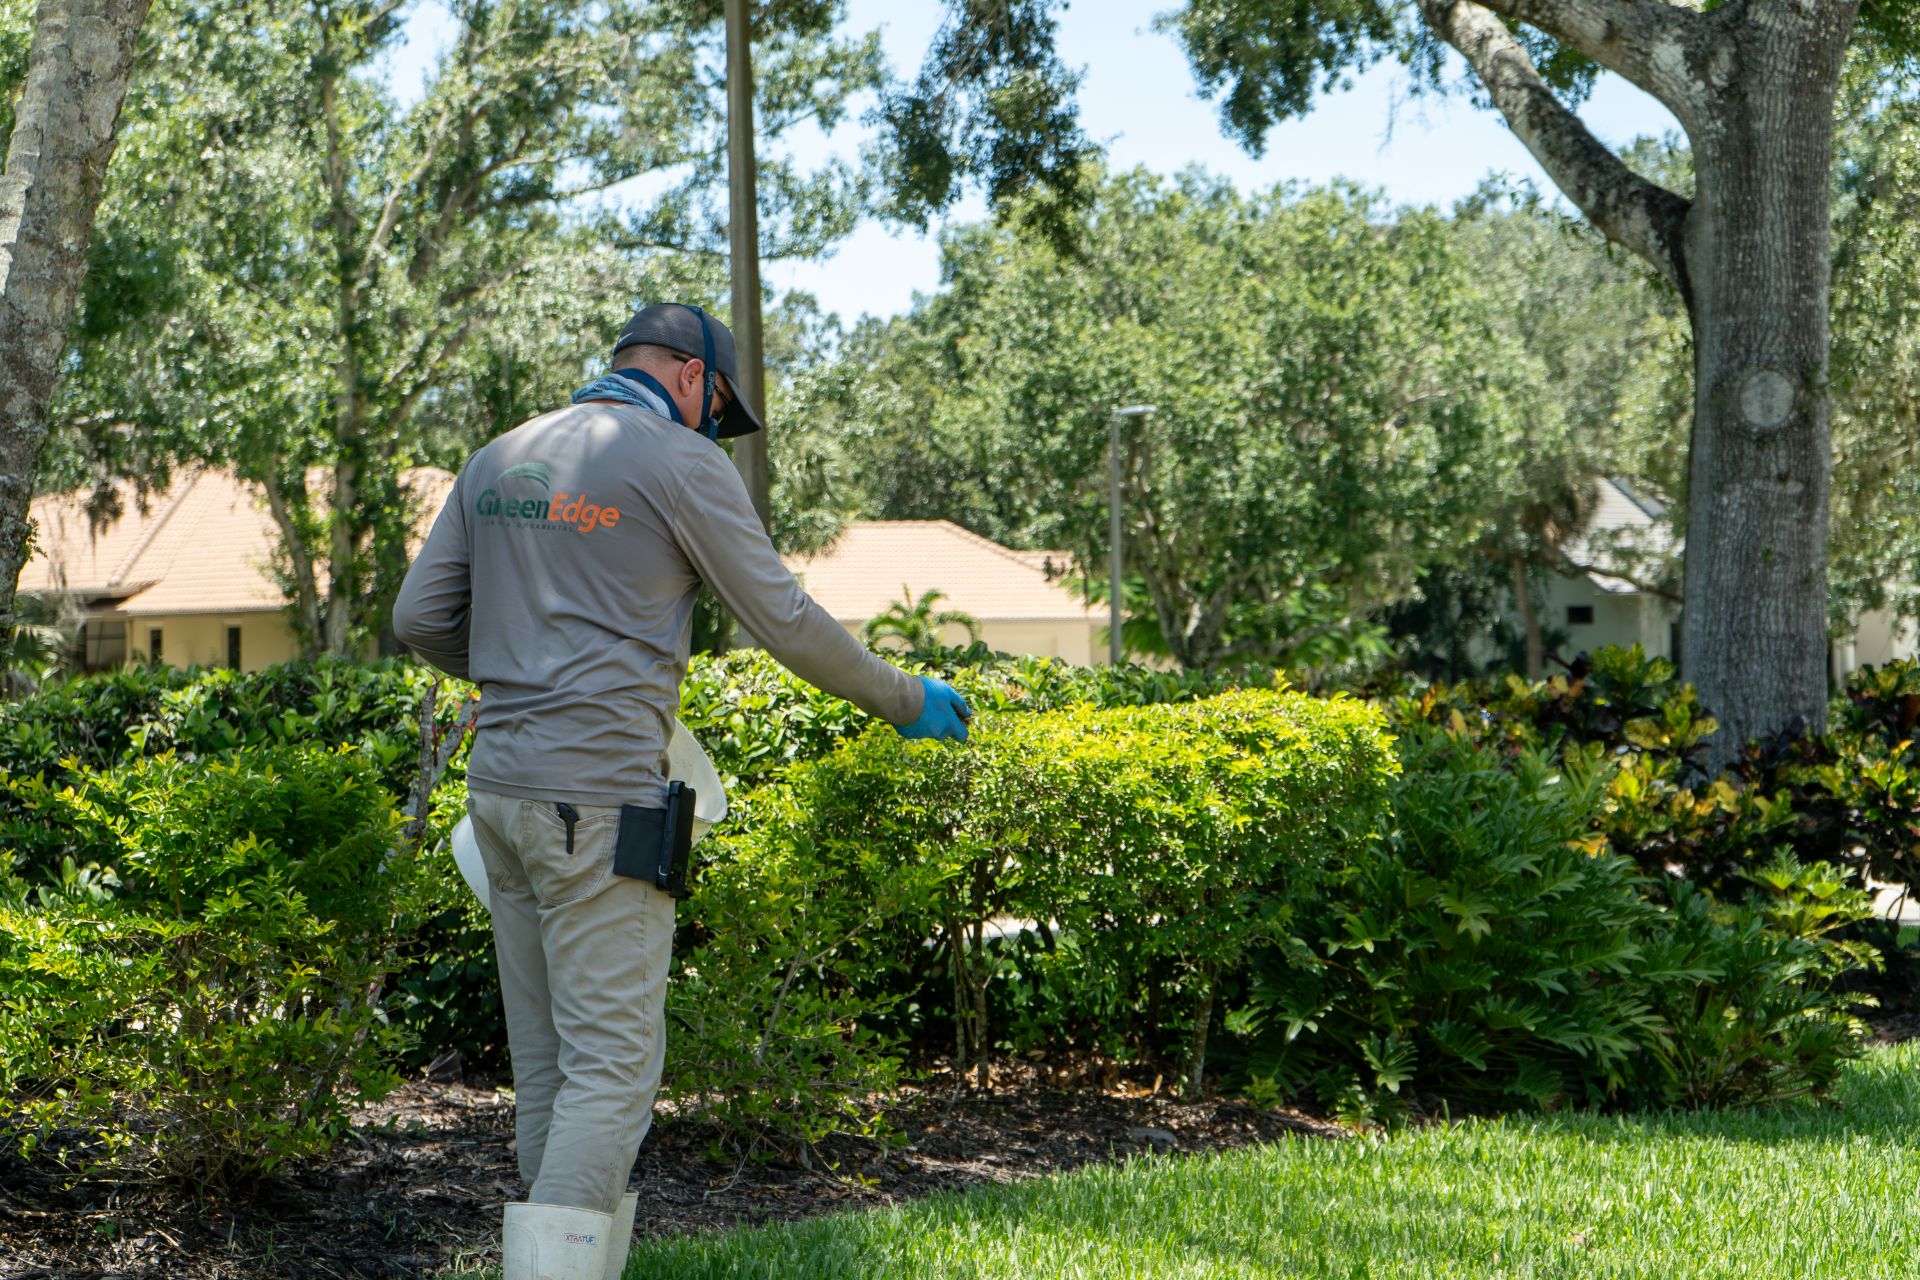 A GreenEdge staff member expertly showering fertilizer on a lawn in Sarasota. Our team ensures even and precise application of nutrients to promote lush and healthy grass growth. Trust GreenEdge for professional fertilizer treatments that nourish and beautify your lawn.